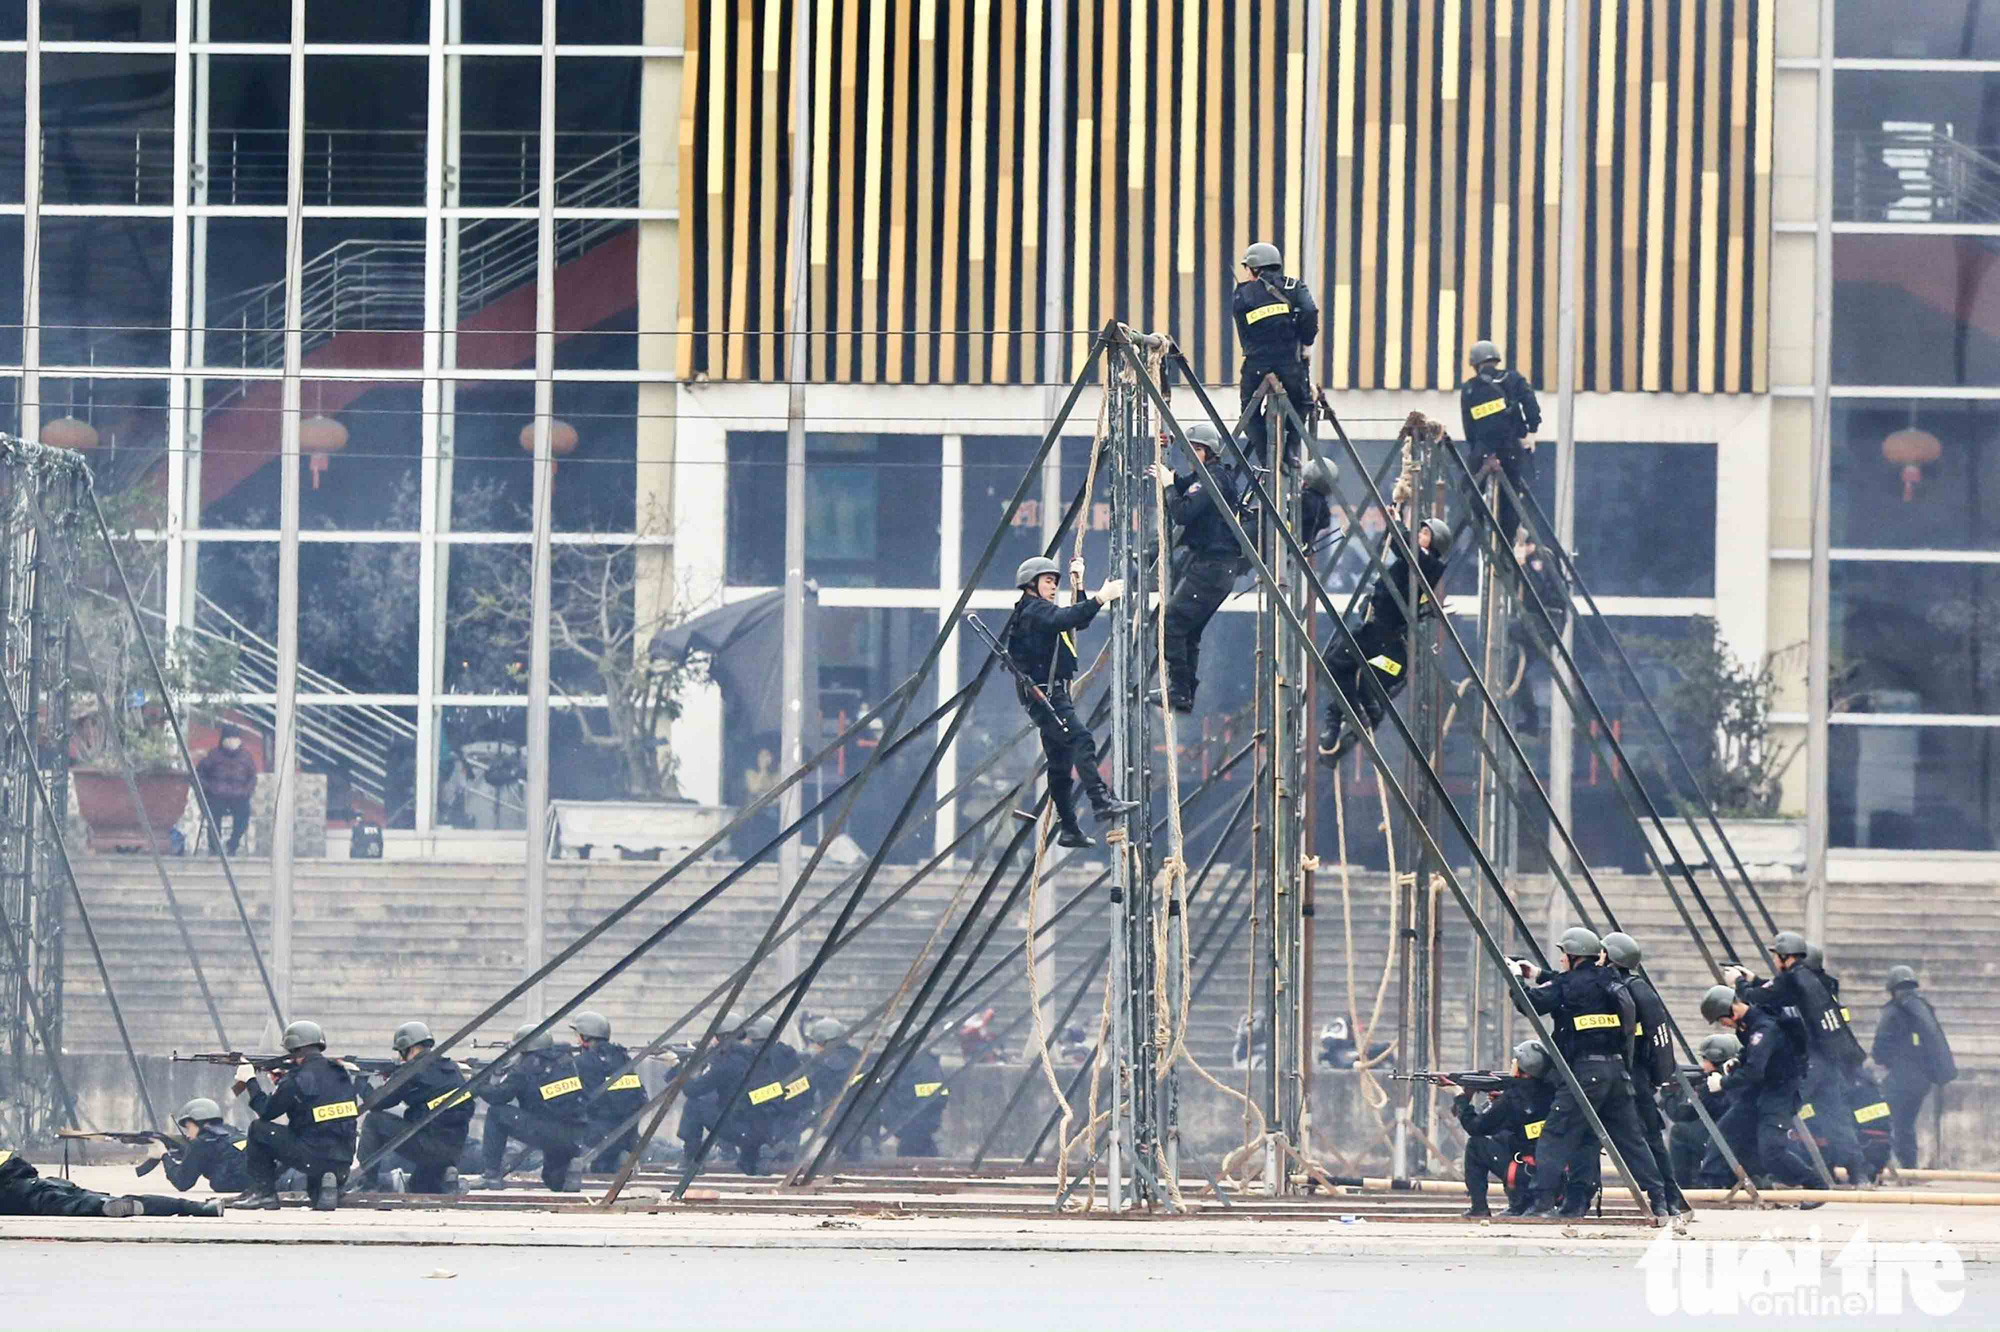 Officers take part in an exercise to prepare for the National Party Congress in Hanoi, January 10, 2021. Photo: Quang Minh / Tuoi Tre